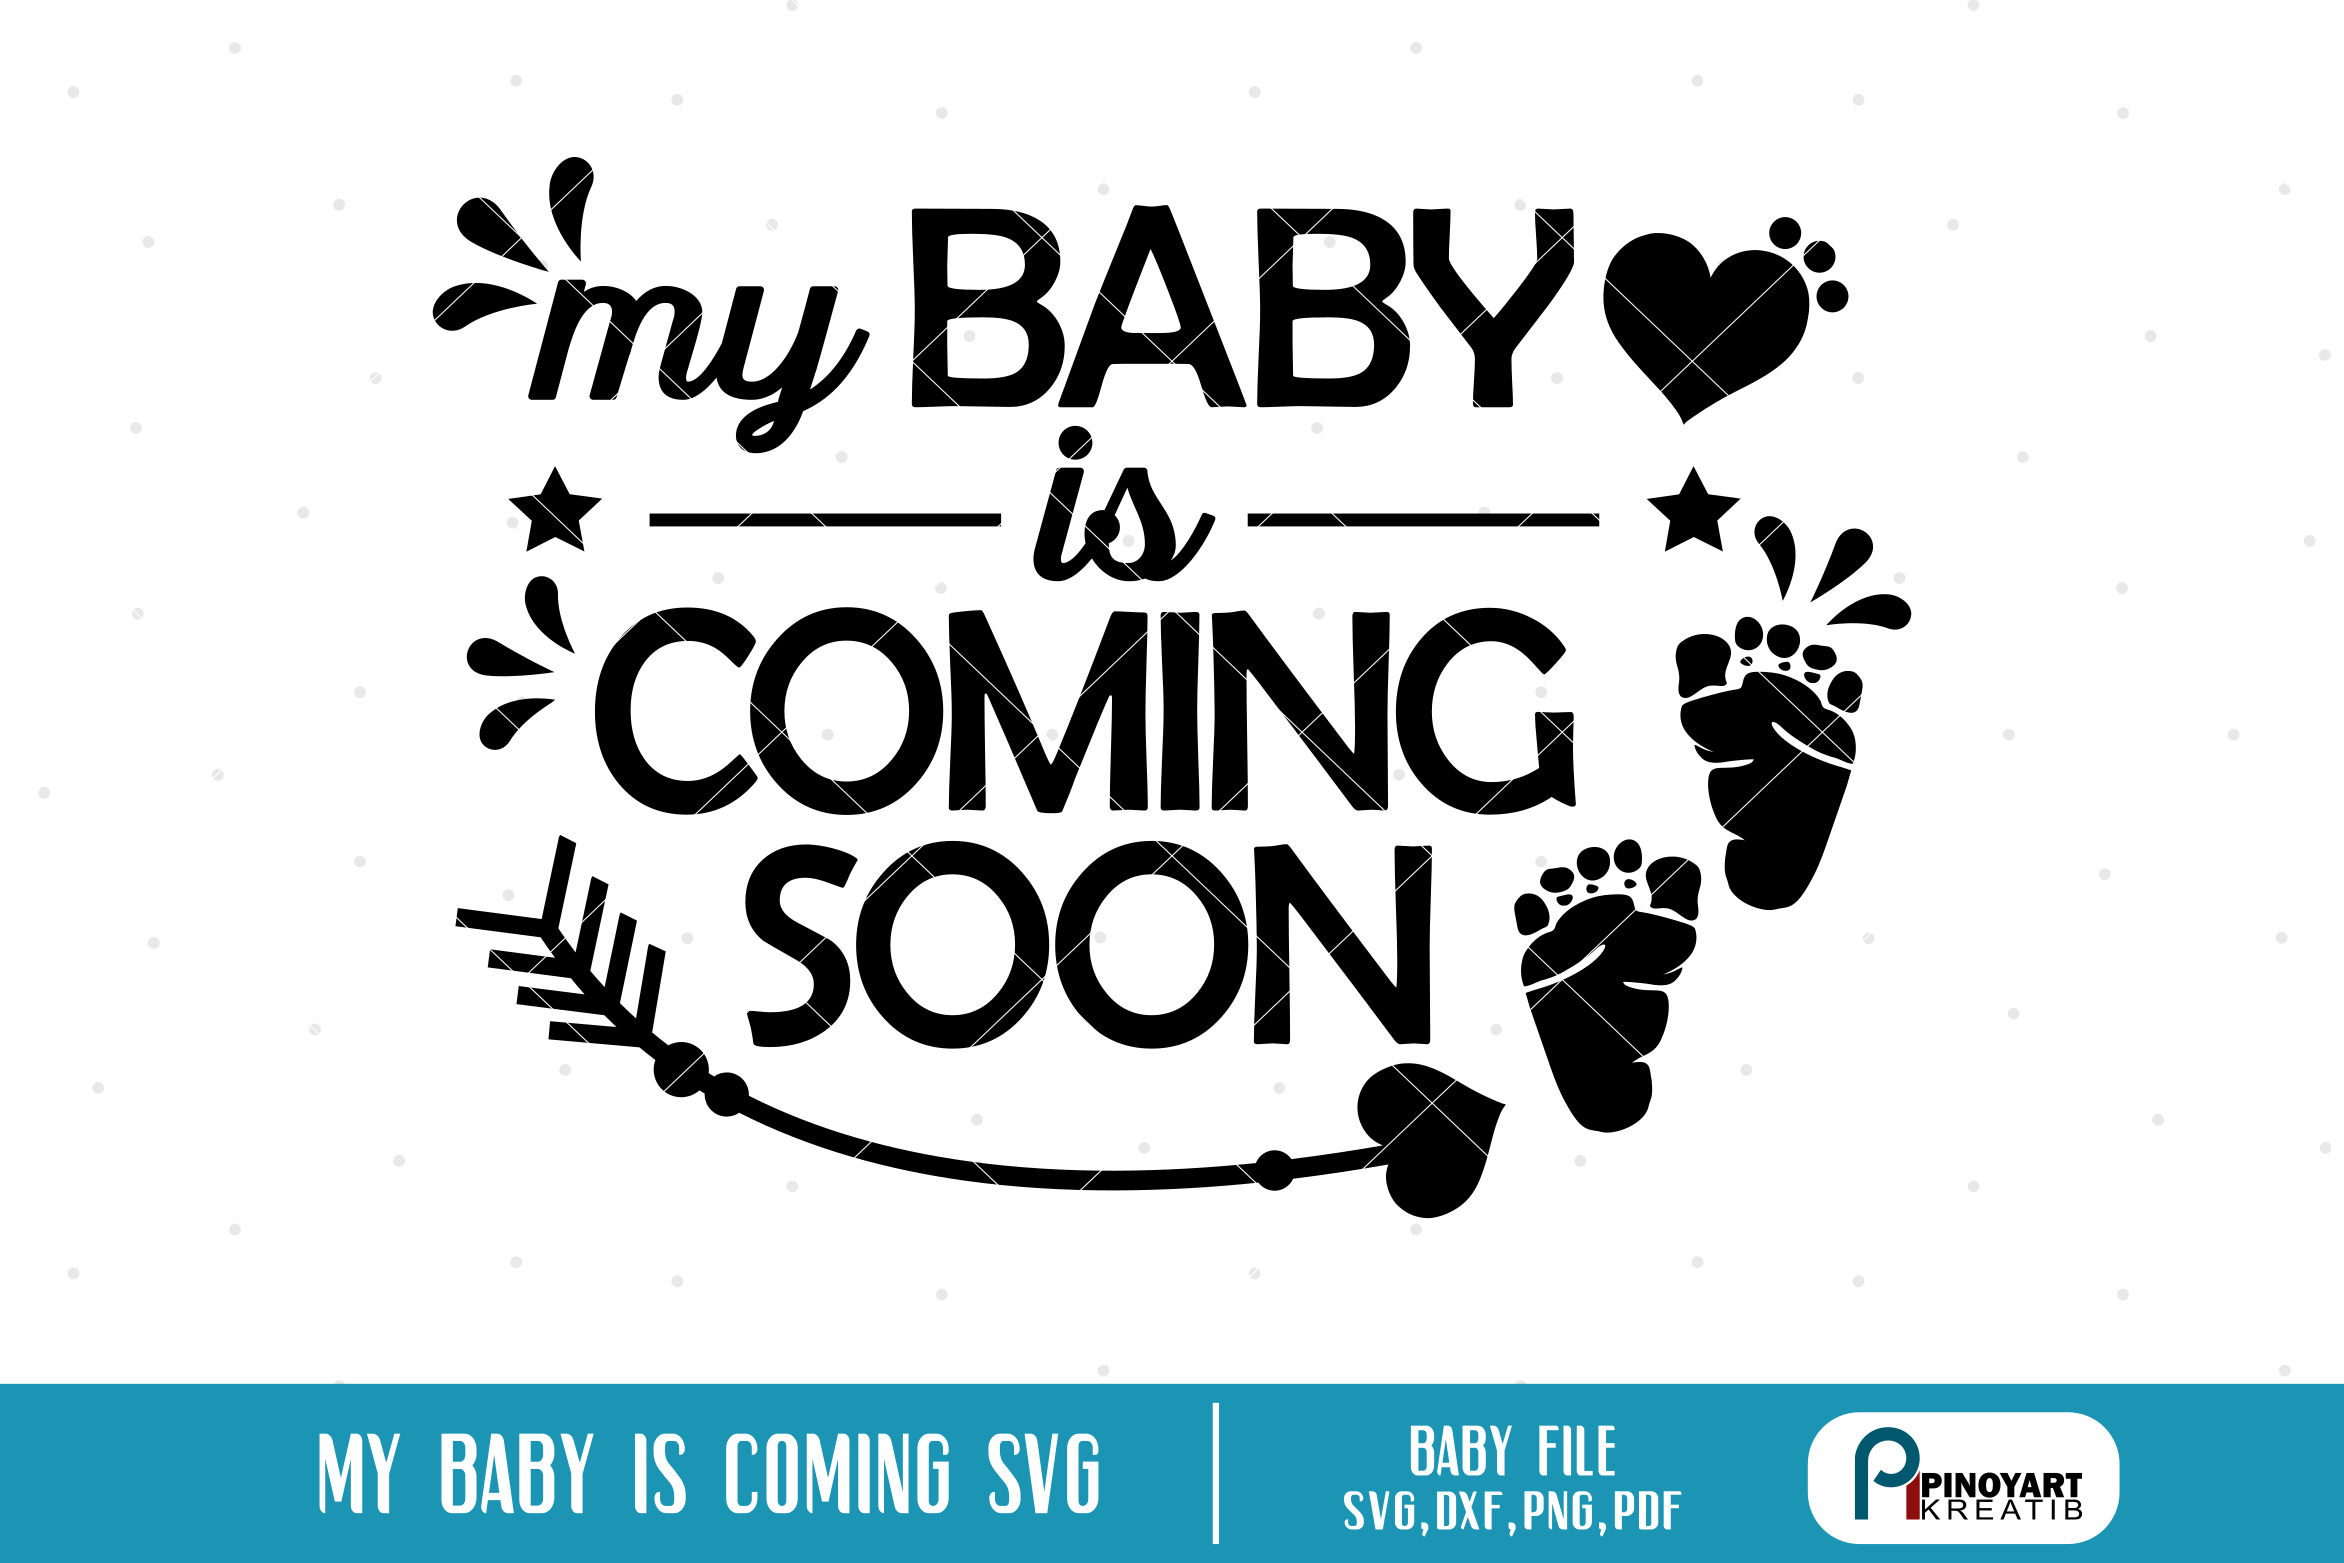 My Baby is Coming Soon SVG, Baby Svg File, Baby Clip Art2344 x 1563